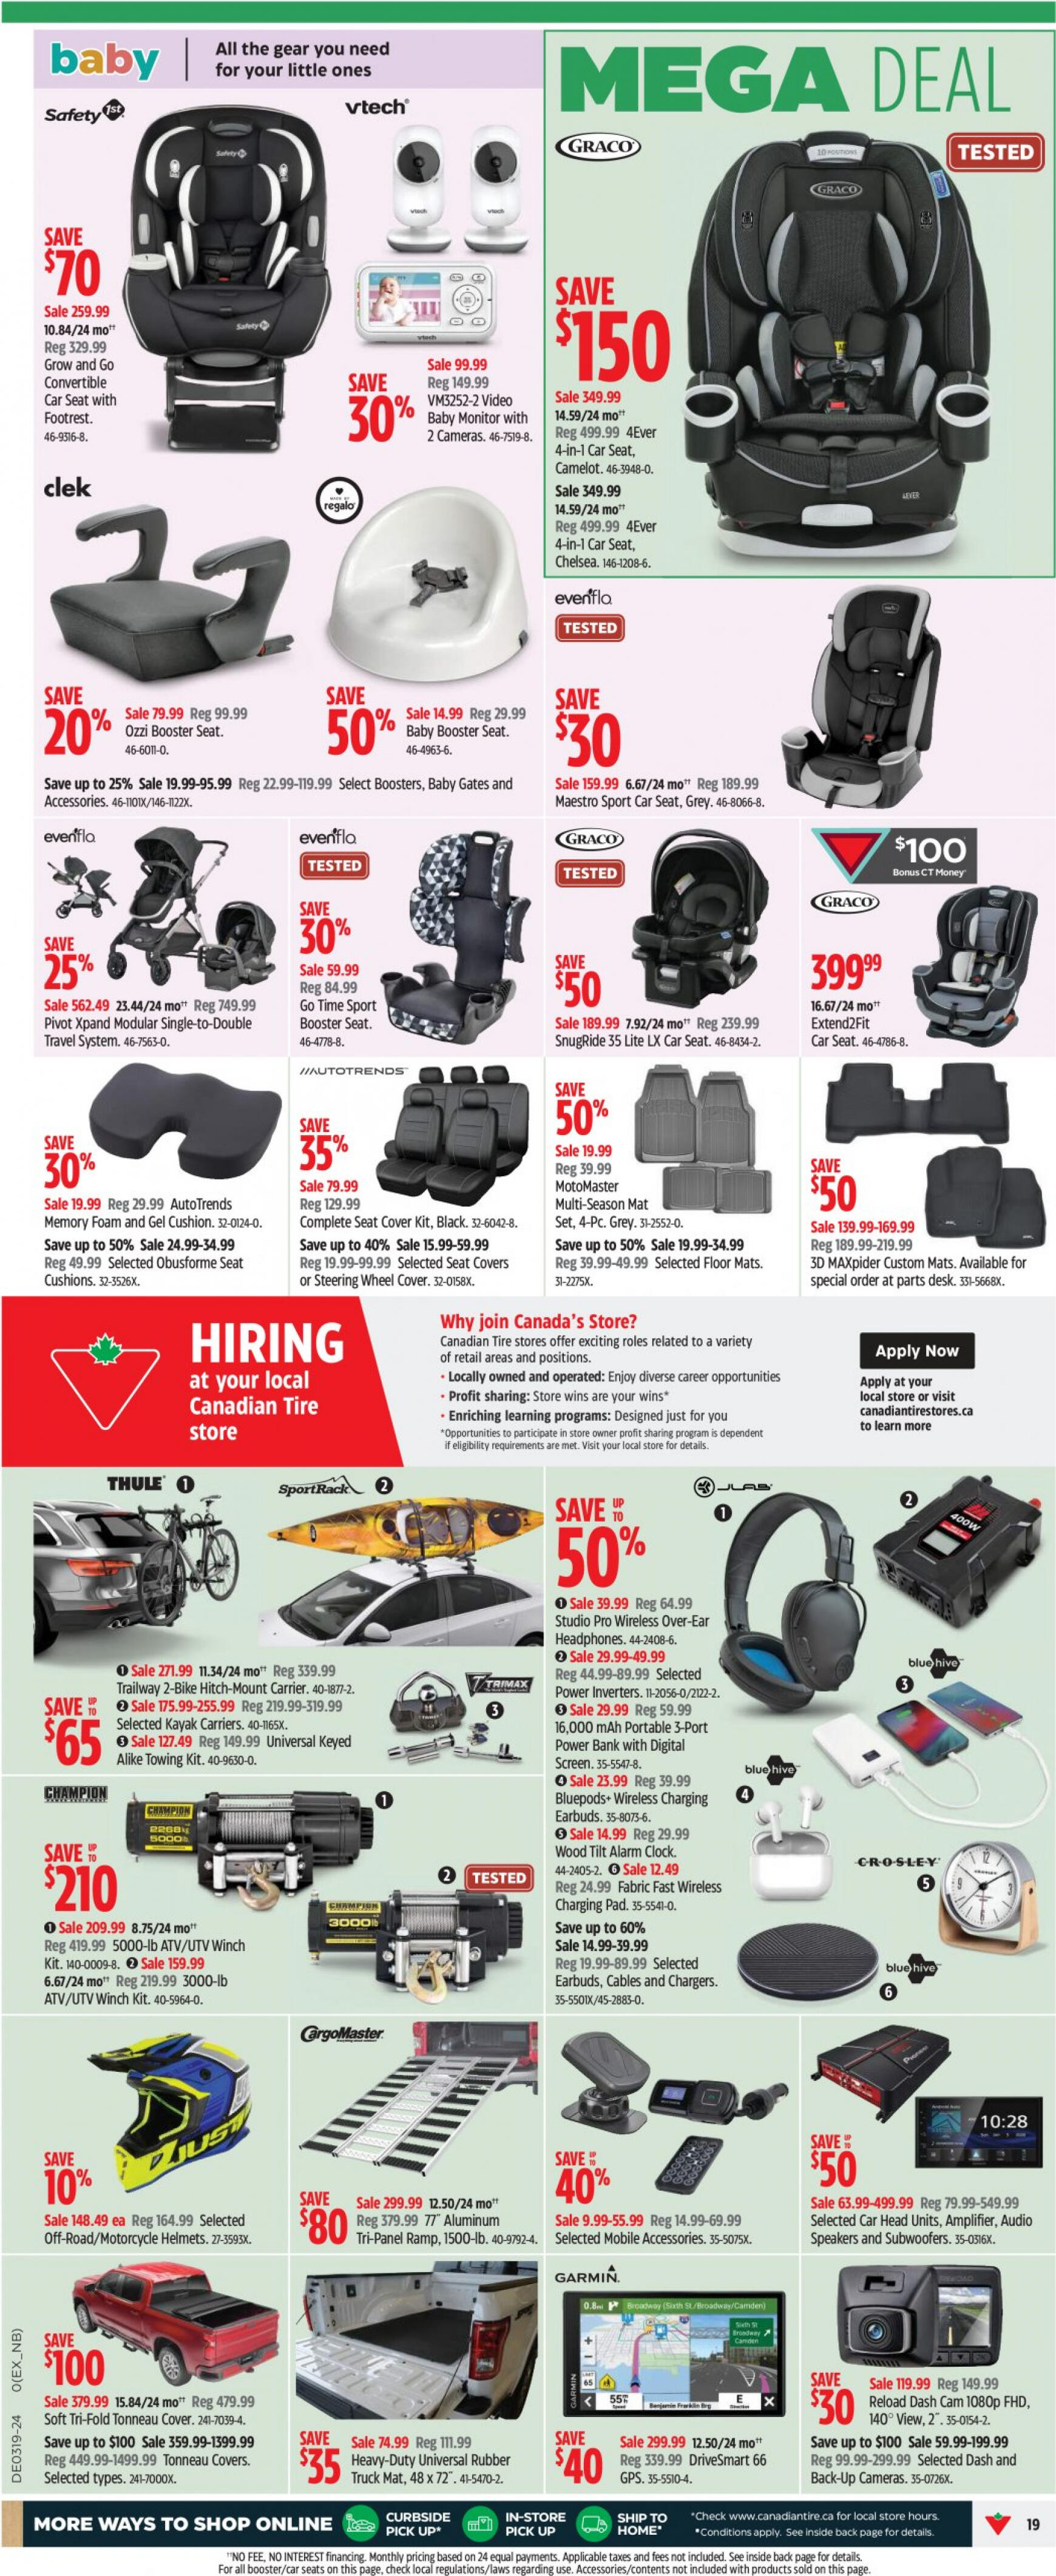 canadian-tire - Canadian Tire flyer current 02.05. - 08.05. - page: 18